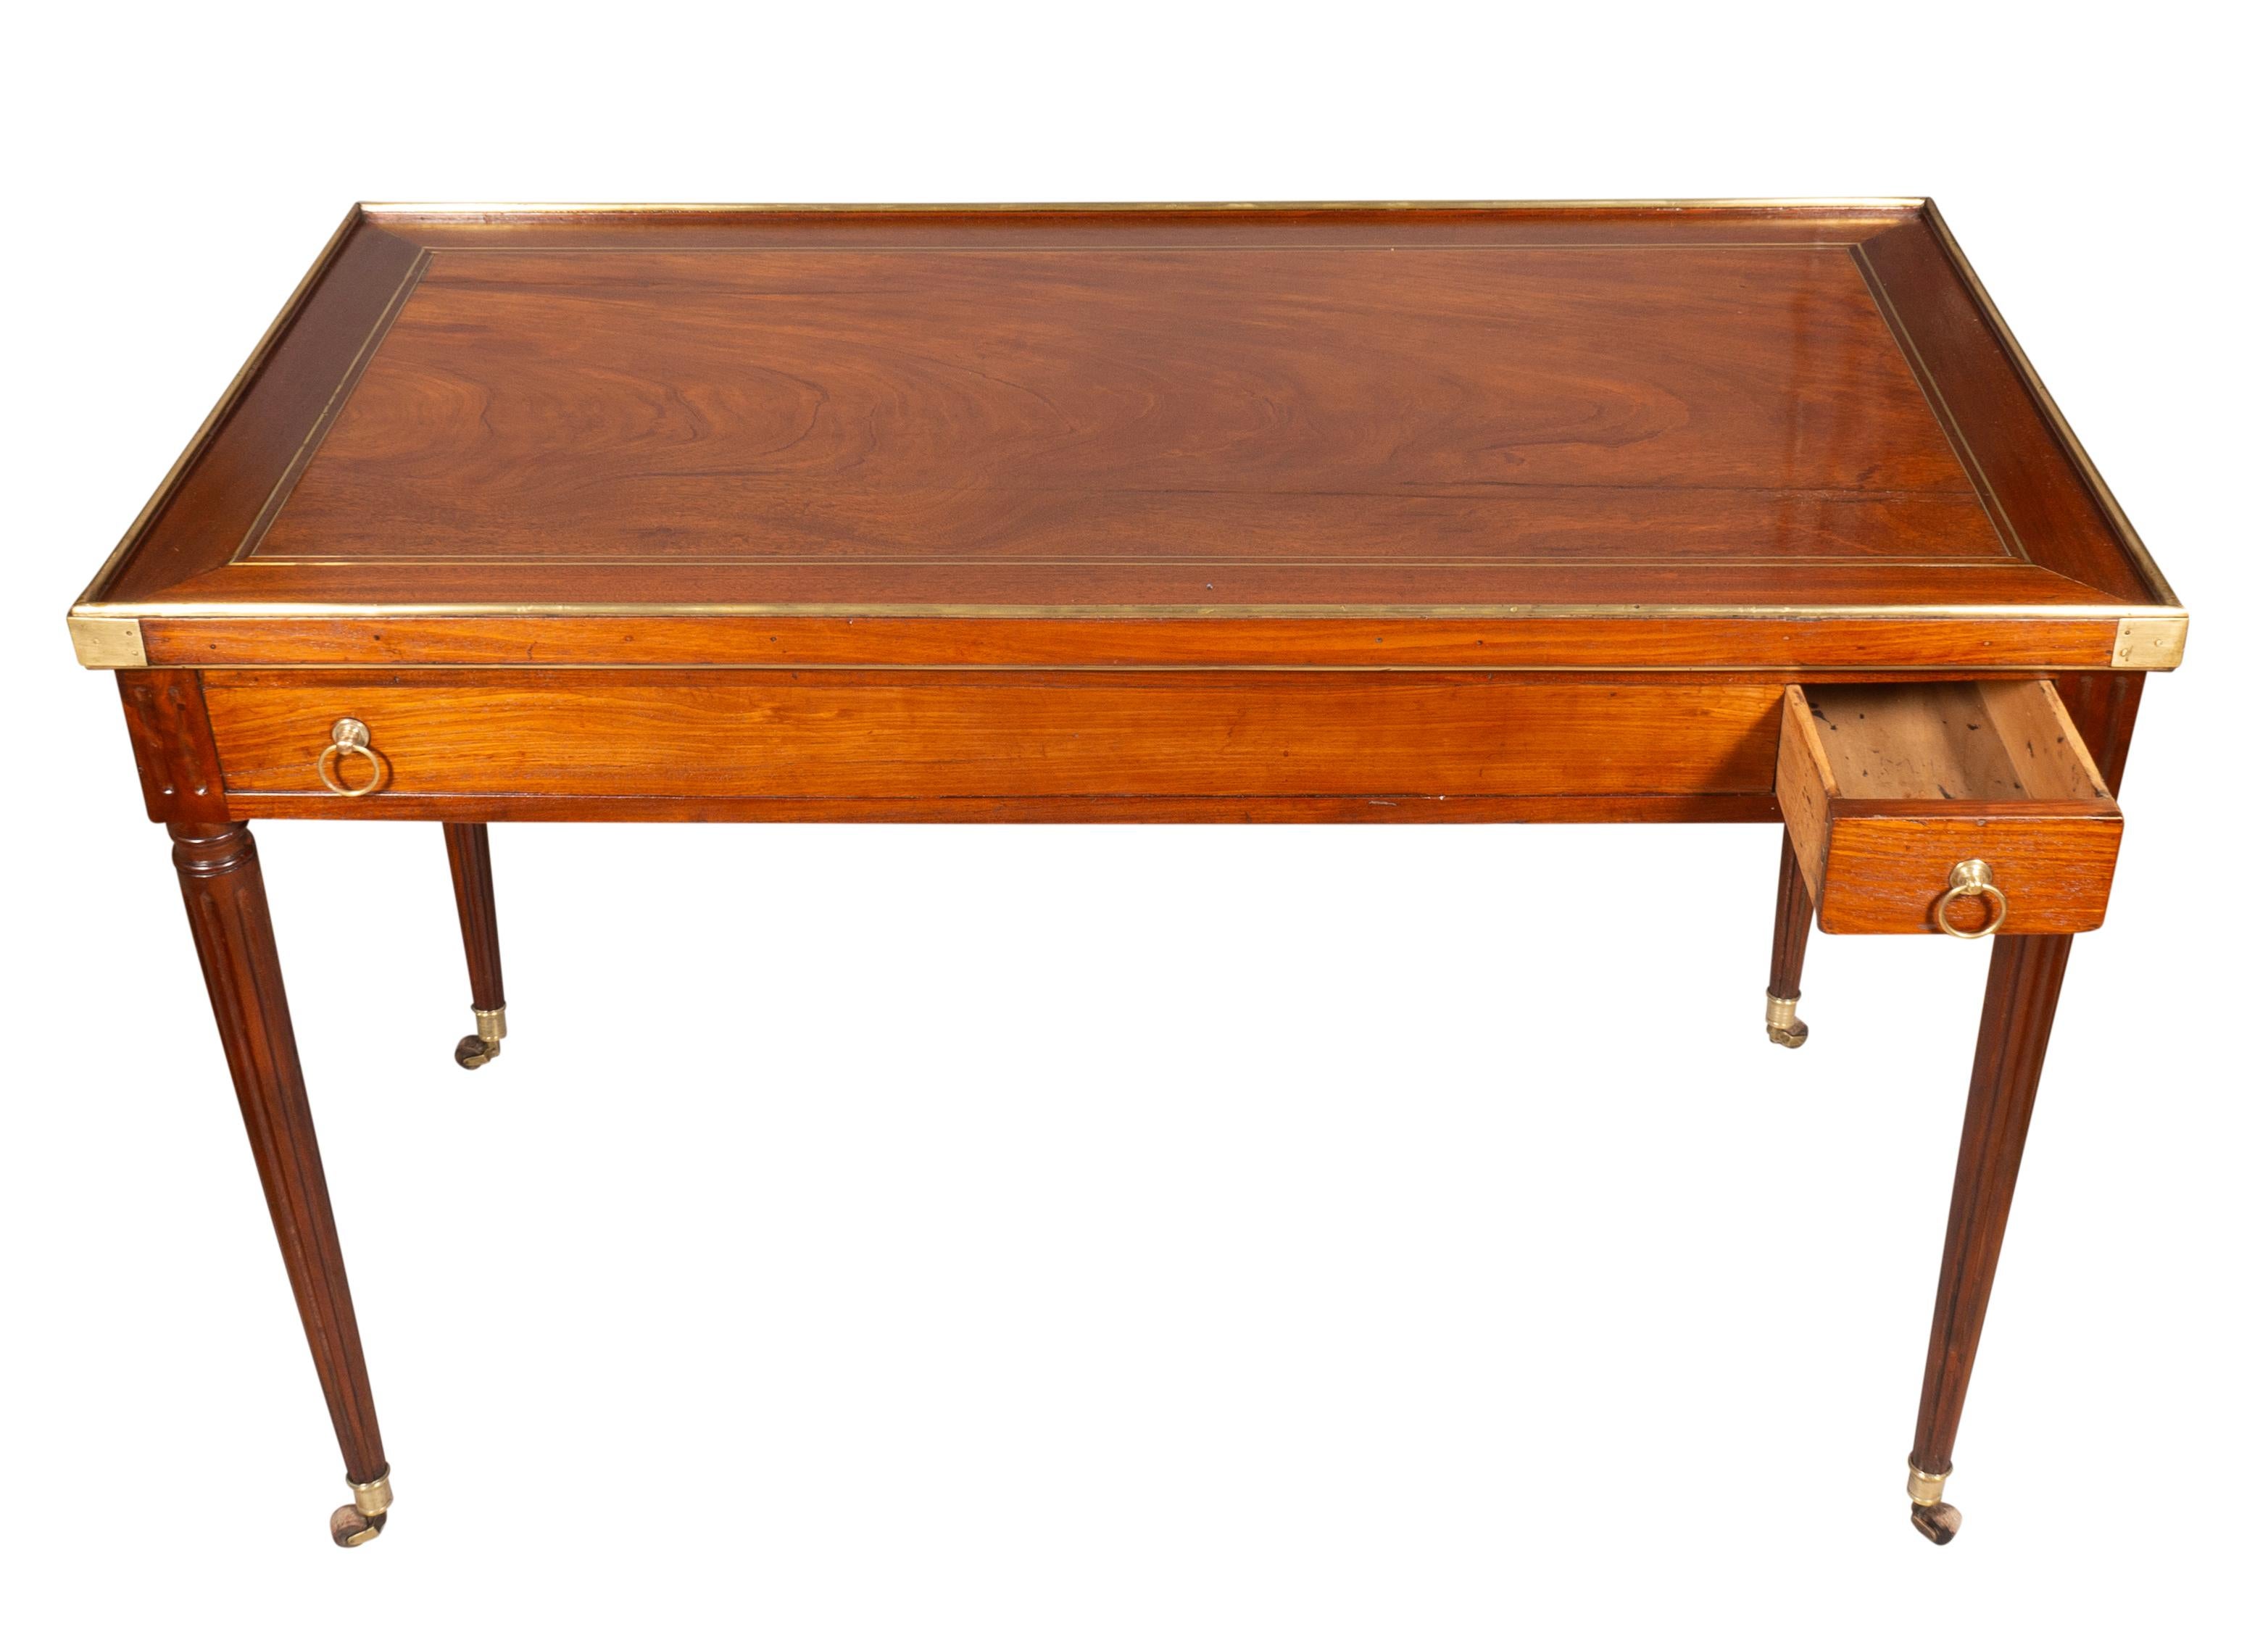 French Directoire Mahogany And Brass Mounted Tric Trac Table For Sale